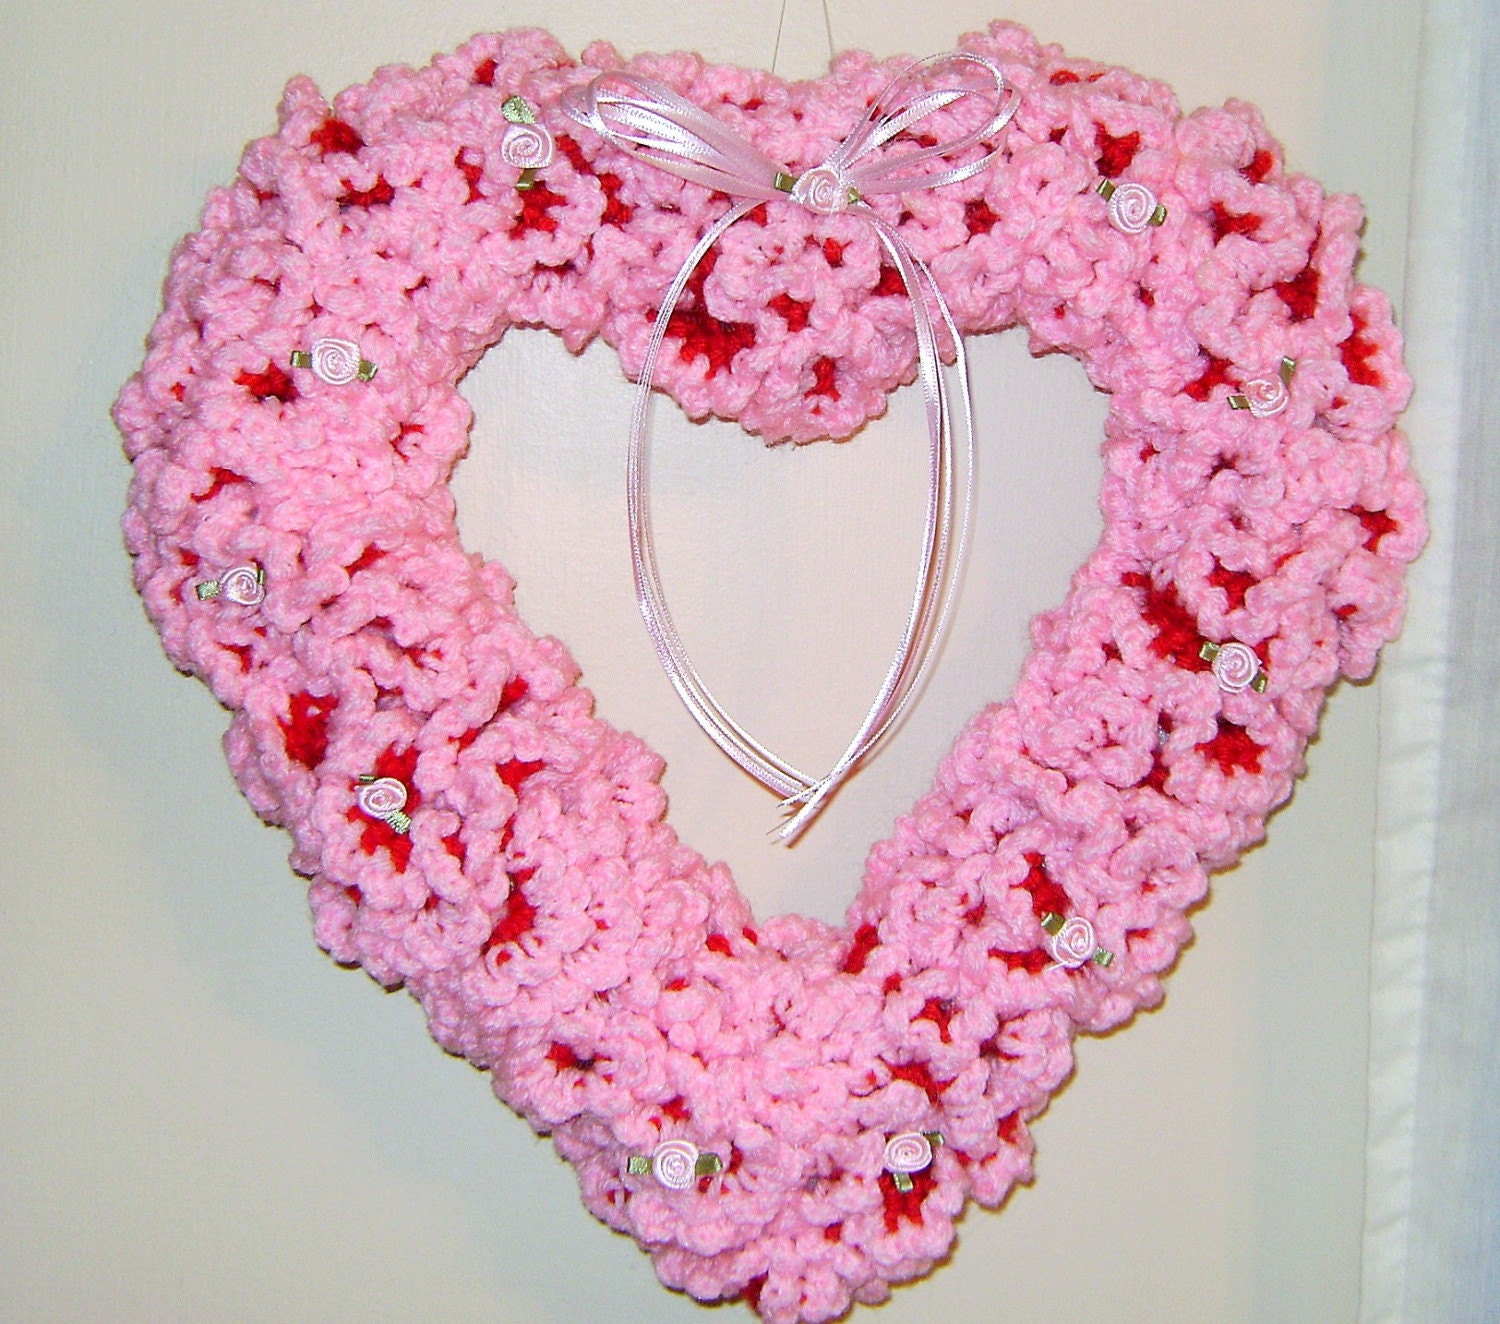 ABC Knitting Patterns - Red Heart.